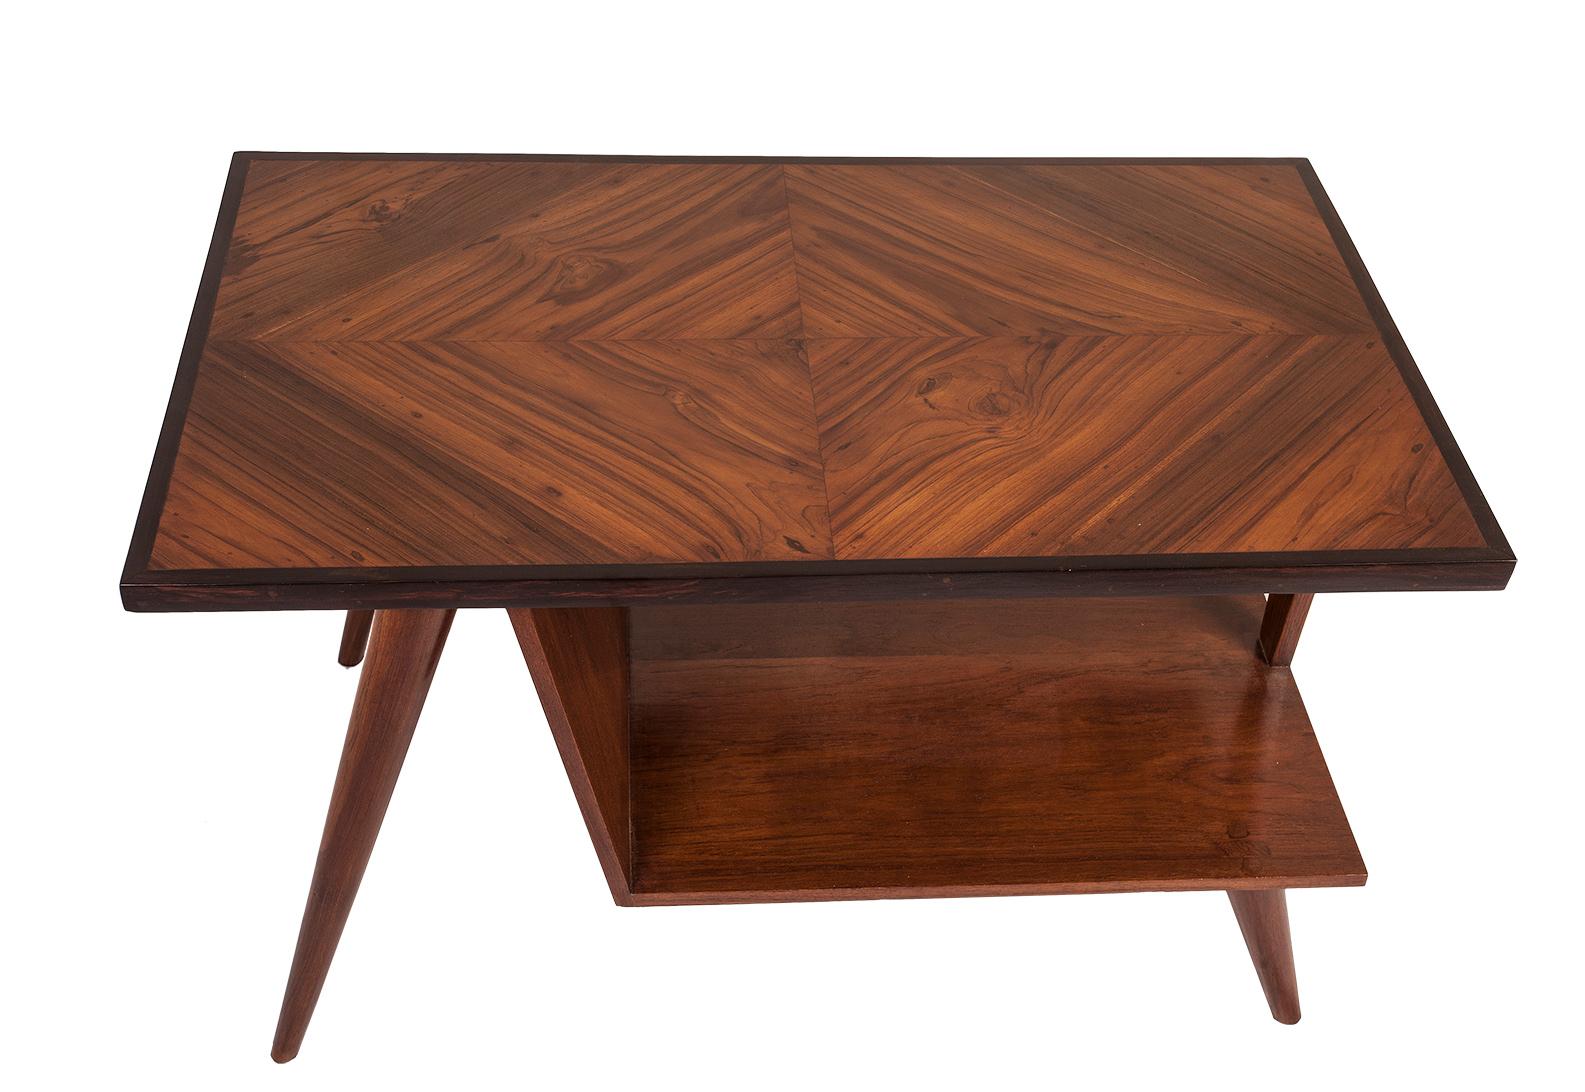 A Mid-Century Modern teak wood coffee table with a rosewood border. Great use of the wood grains on the top. Tapered legs. Lower shelf measures 10